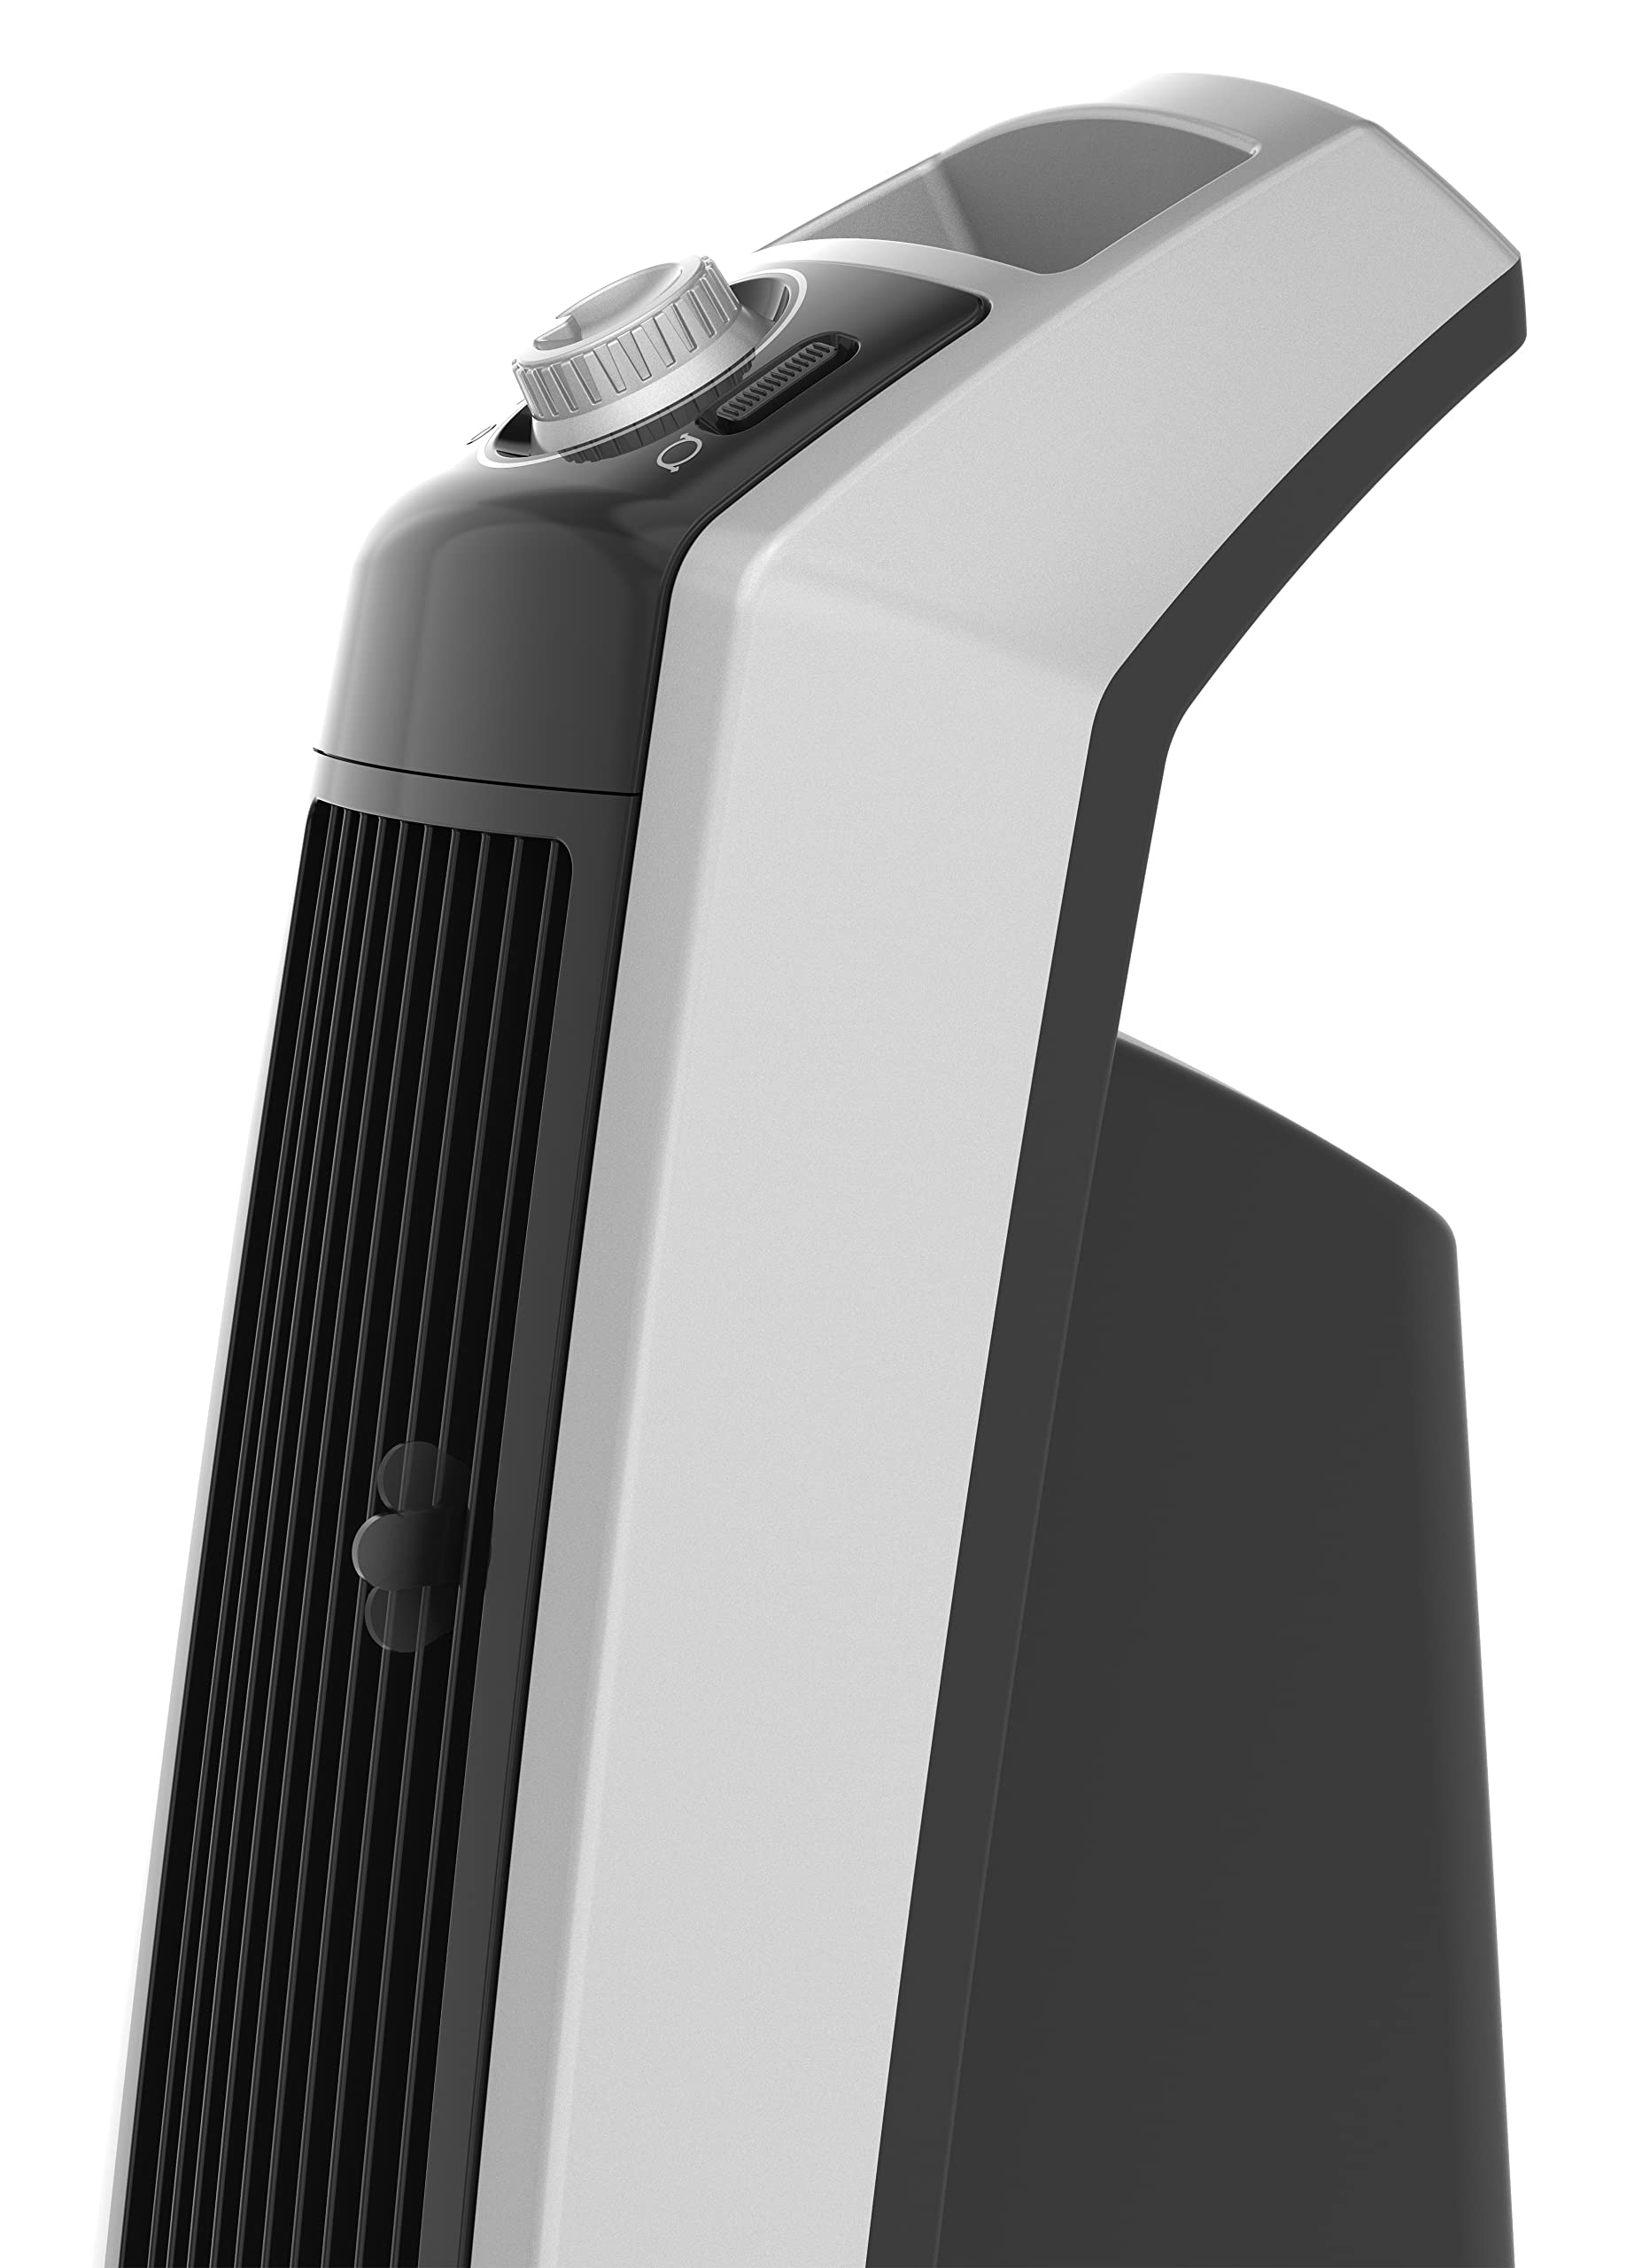 Lasko Oscillating High Velocity Tower Fan, Remote Control, Timer, 3 Powerful Speeds, for Garage, Basement and Gym, 35